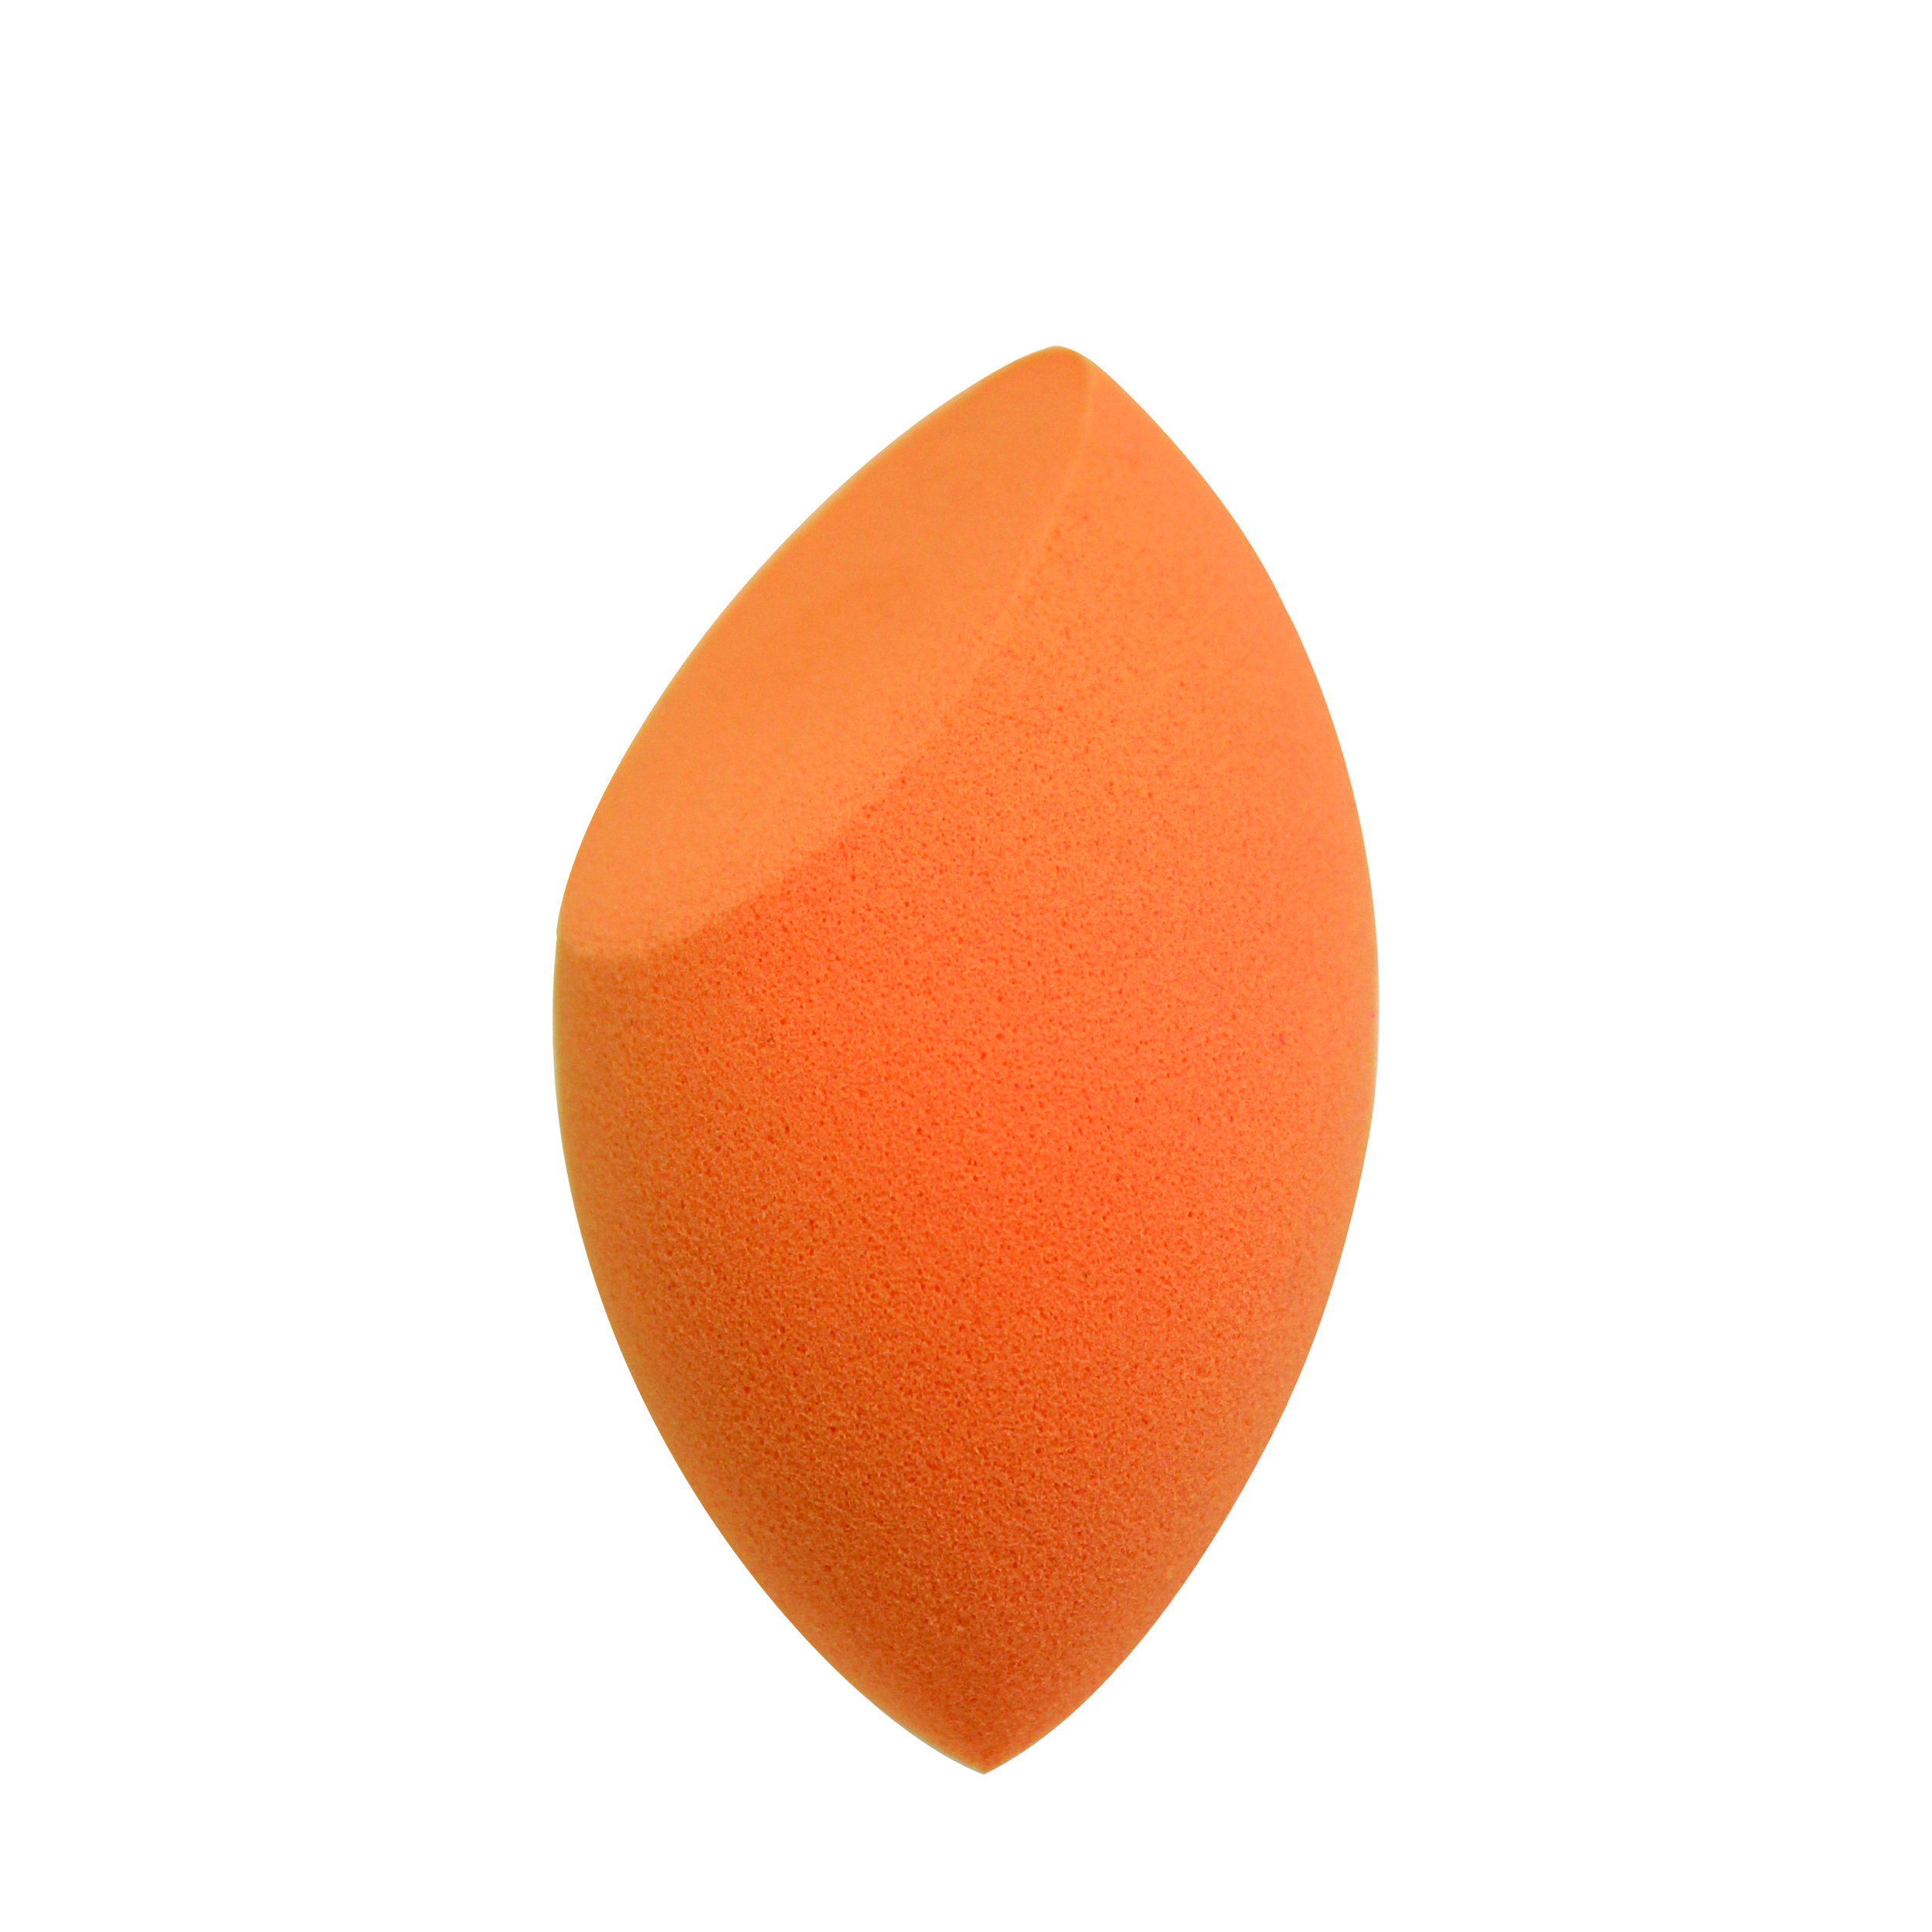 1426-rt-miracle-complexion-sponge-sideview-m3.jpg